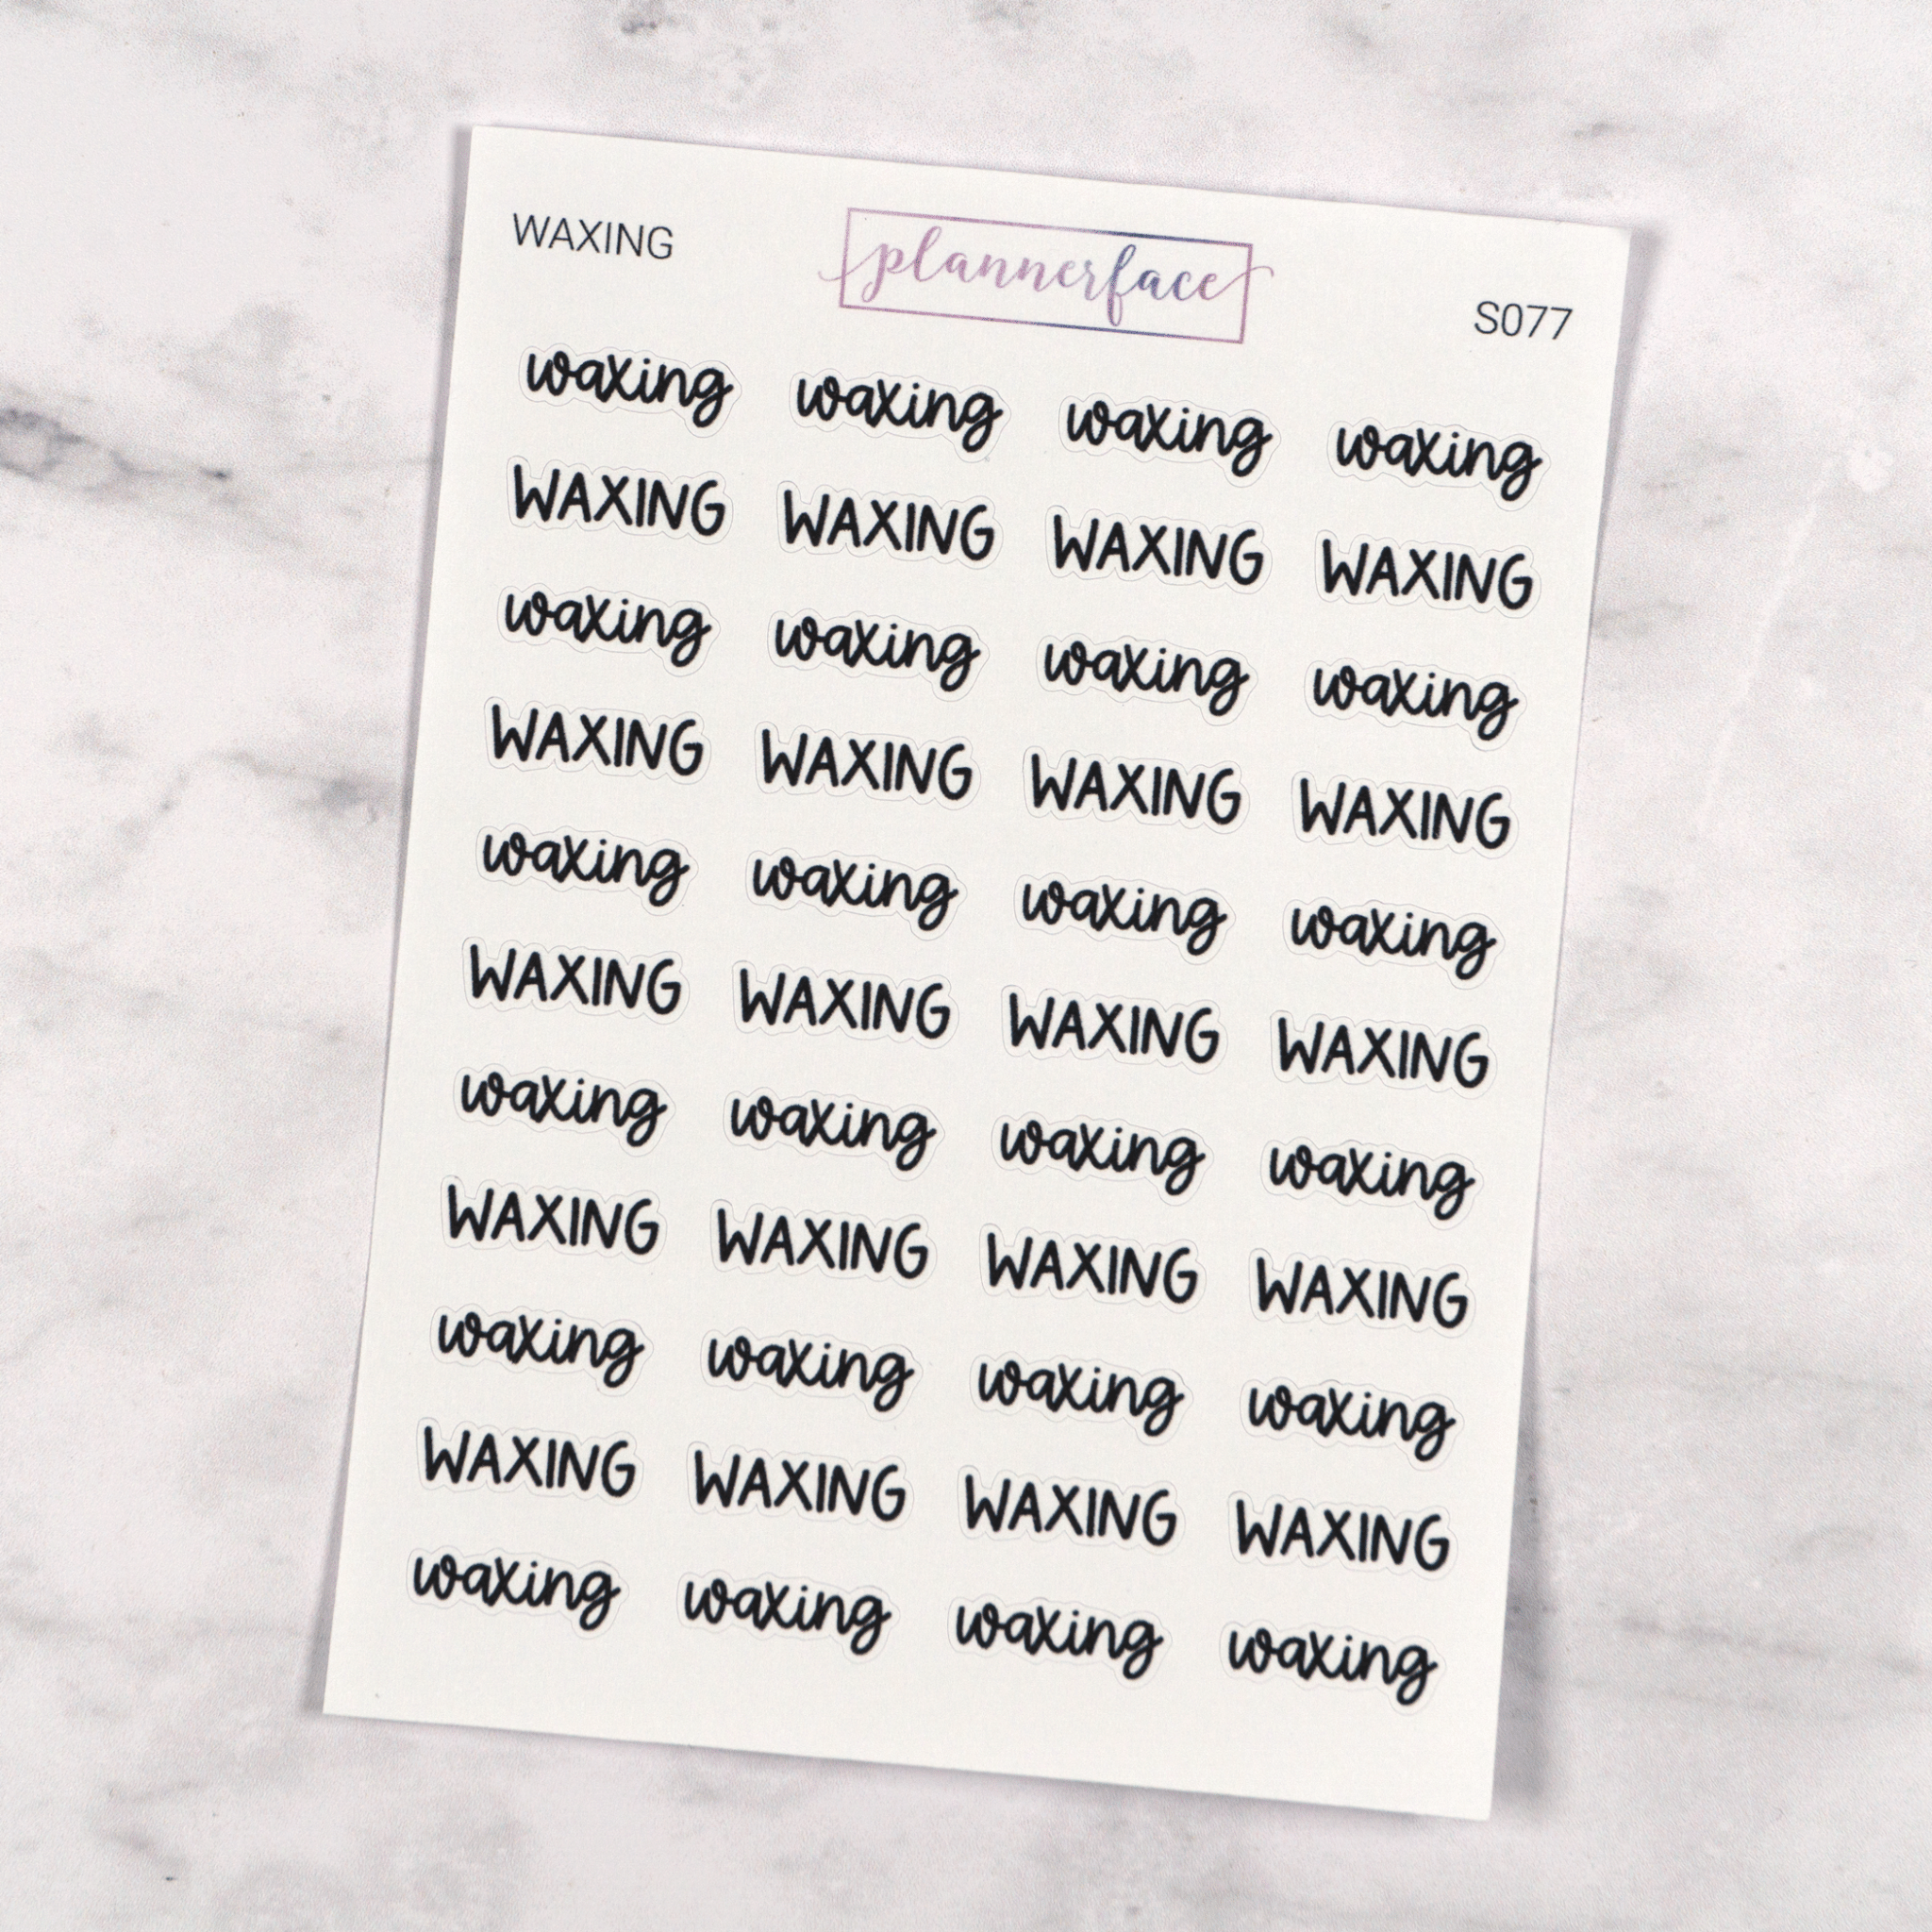 Waxing | Scripts by Plannerface